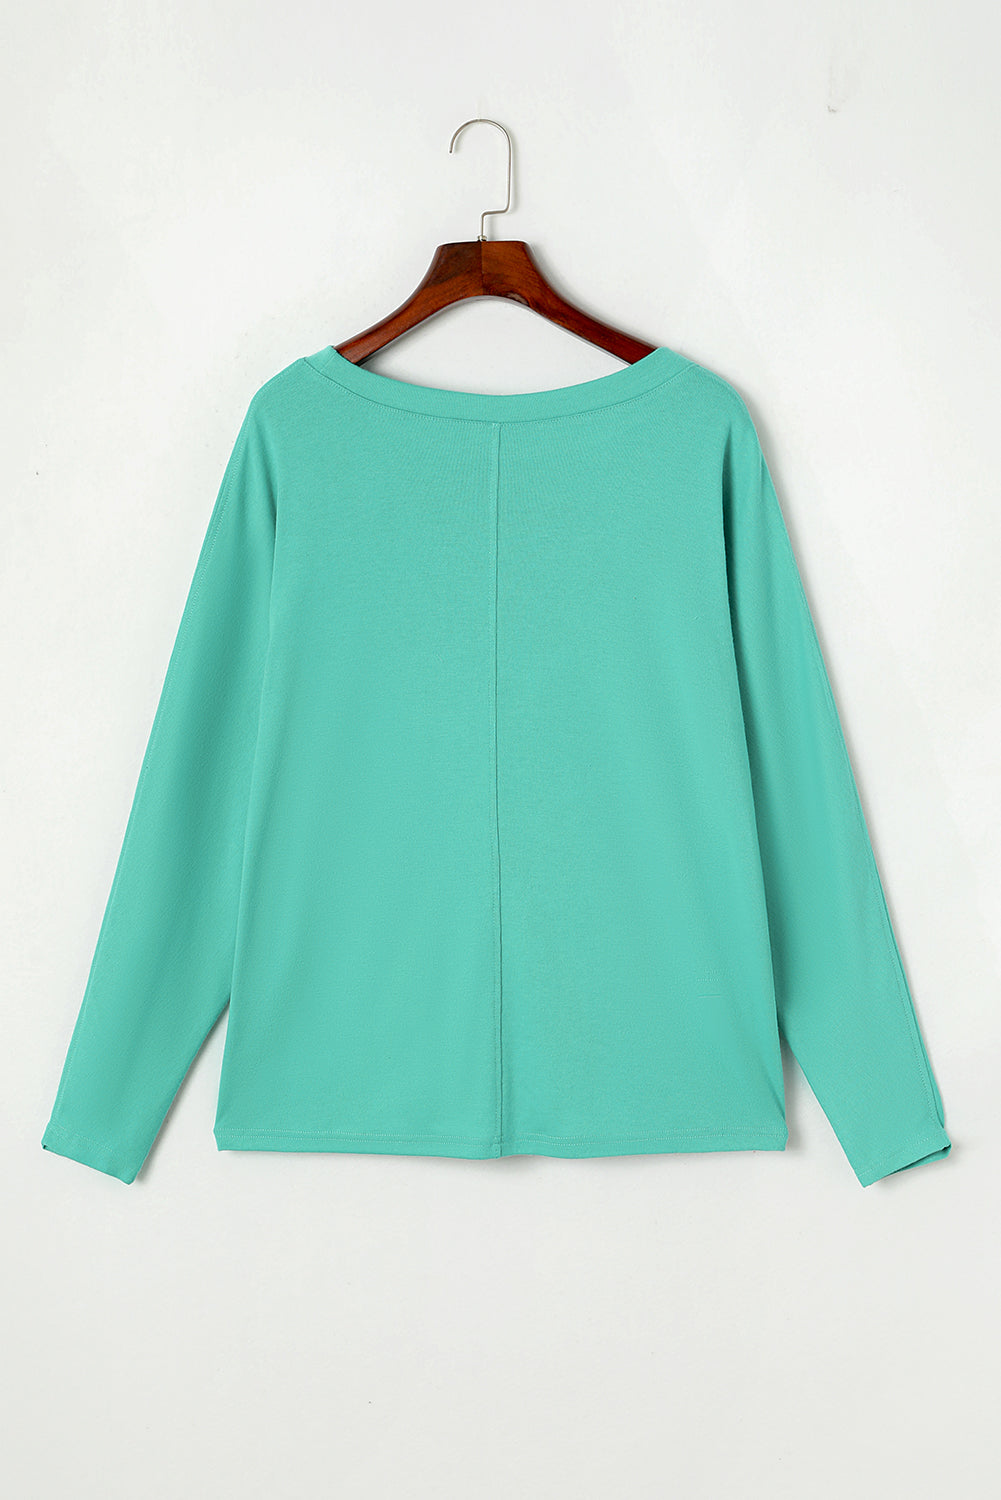 Green Solid Color Patchwork Long Sleeve Top